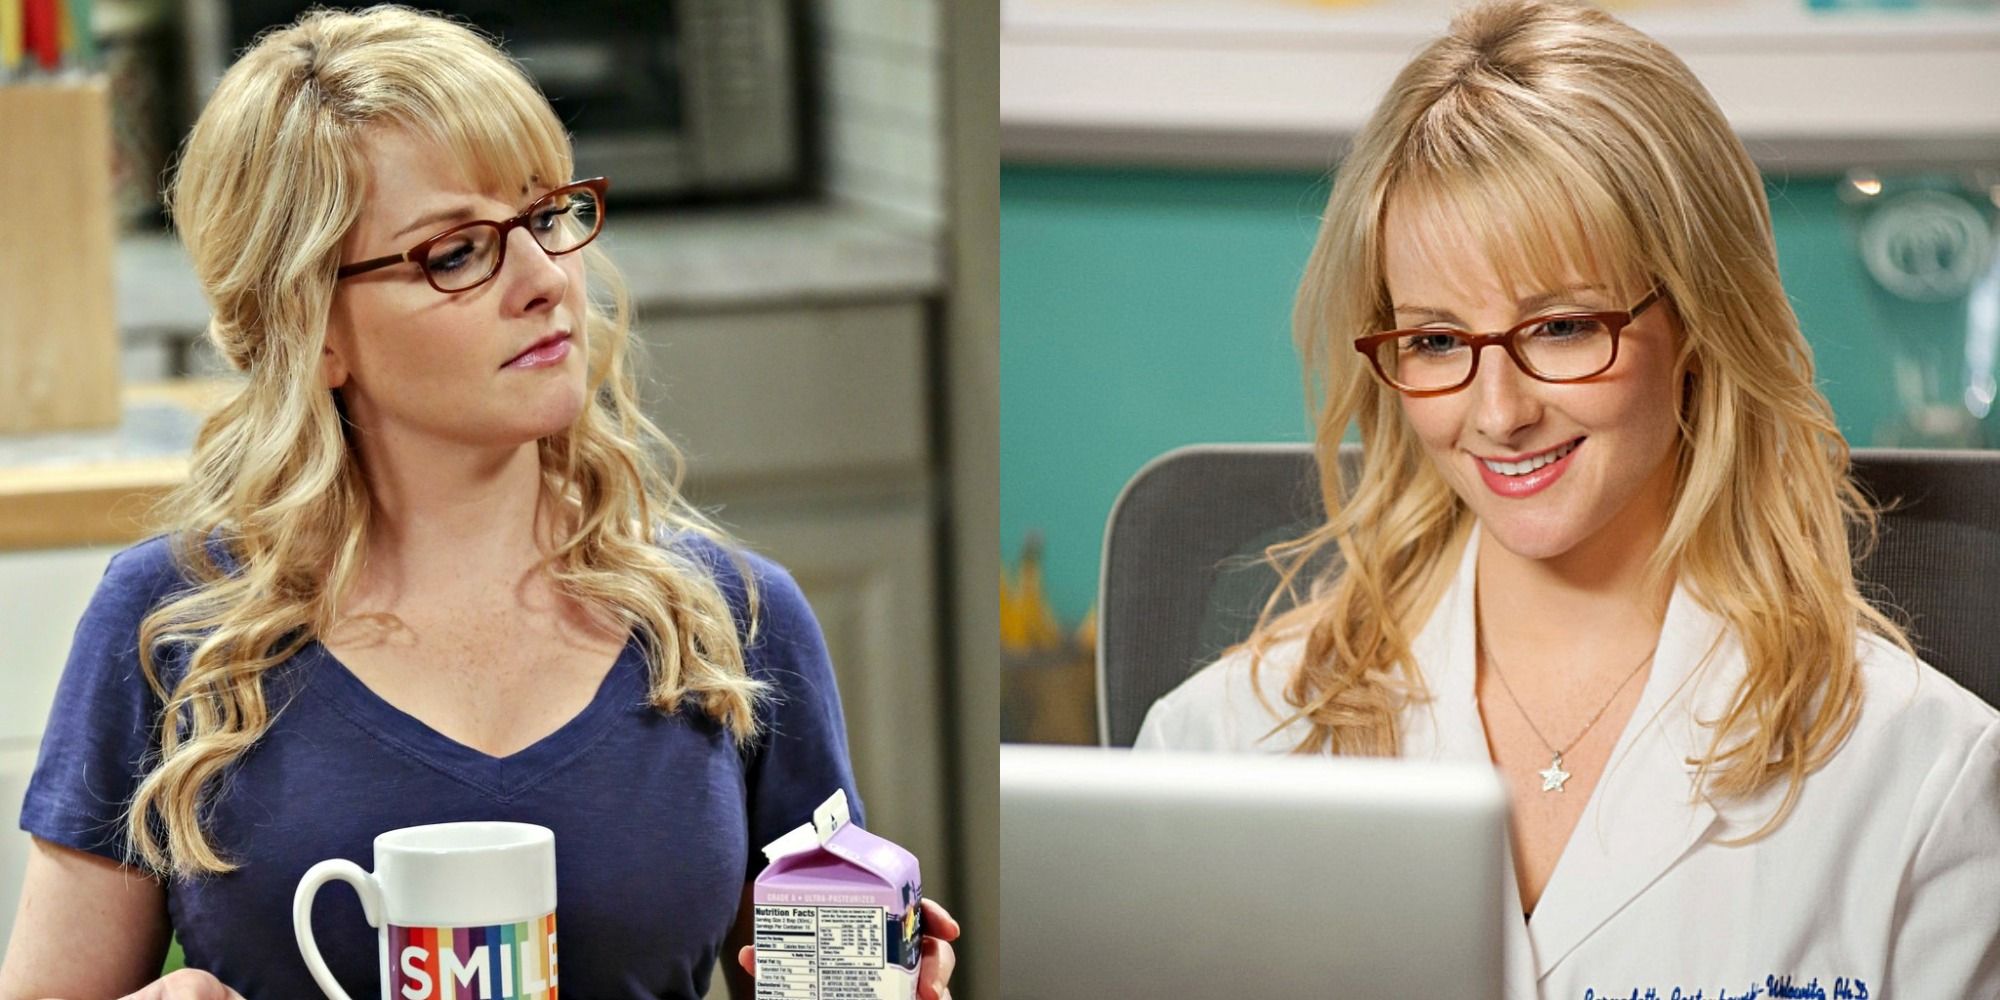 Split image showing Bernadette angry and working in TBBT